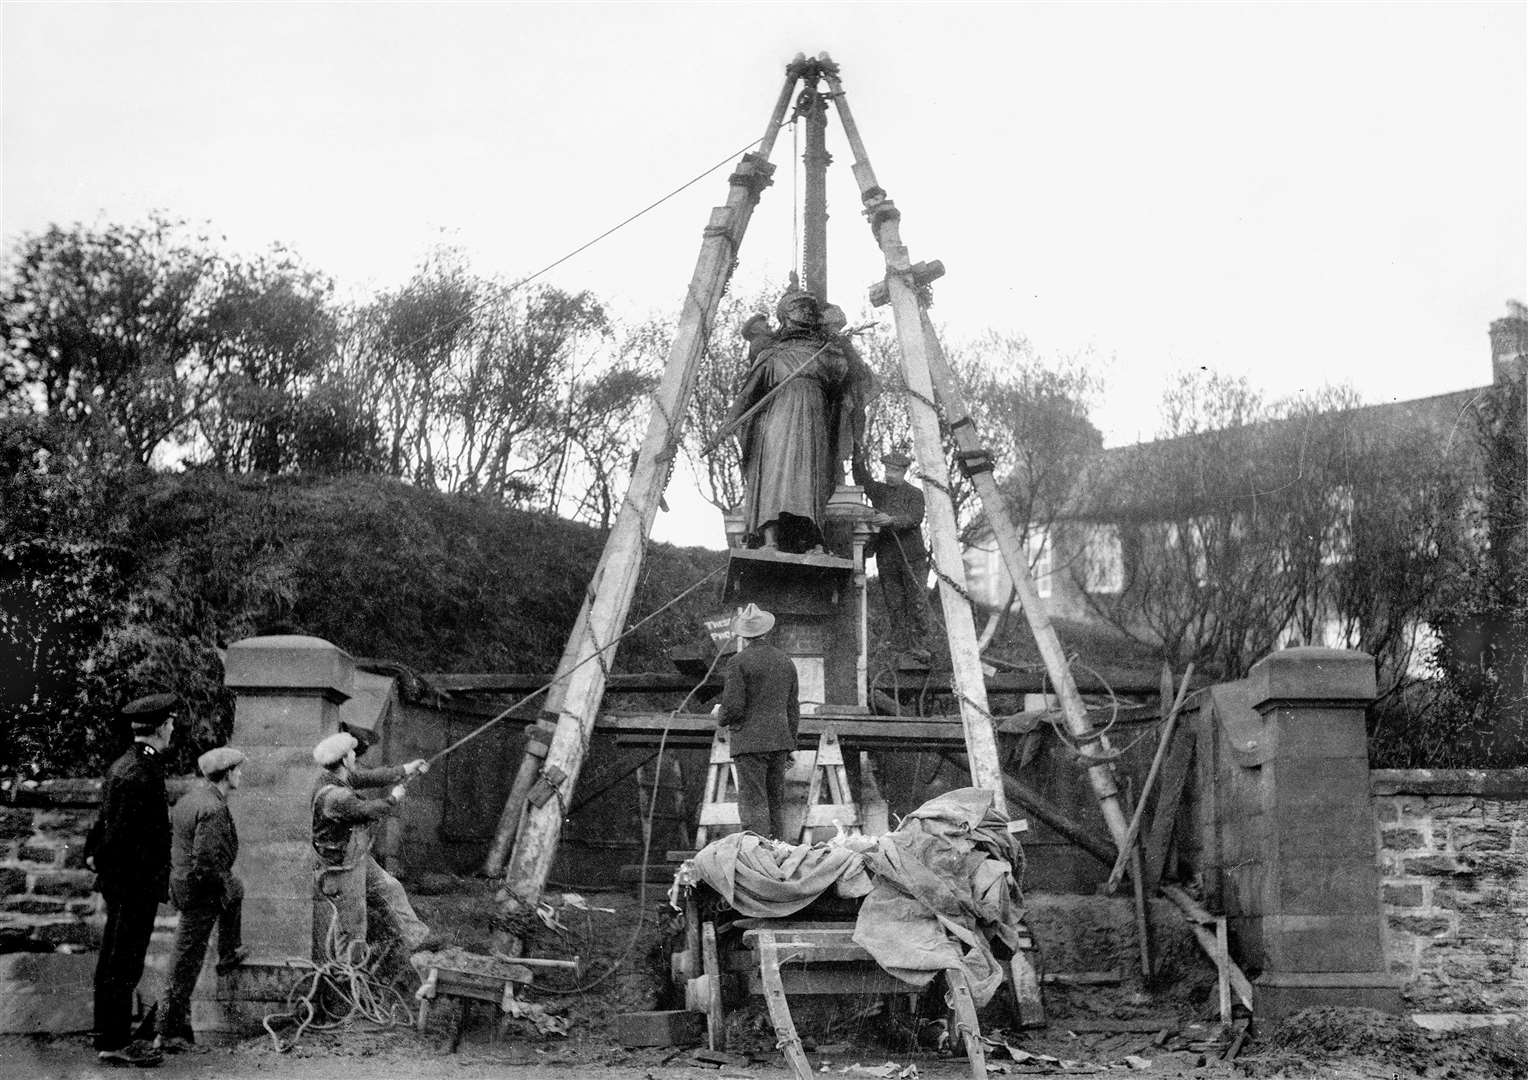 Hood's staff erecting the war memorial in Wick in 1923. The company was already over a century old at that time. Picture from the Johnston Collection, reproduced courtesy of the Wick Society